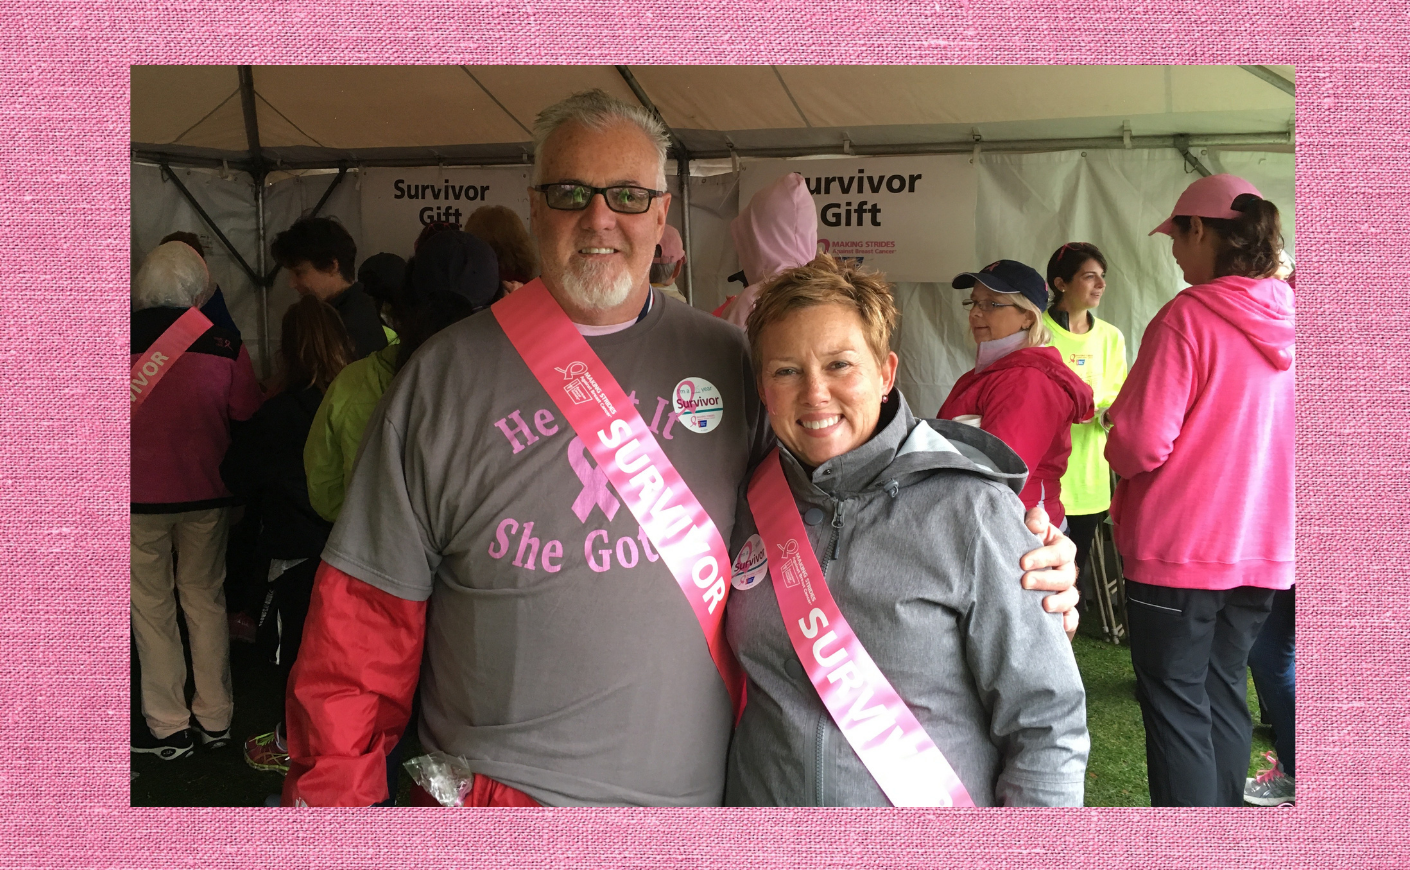 Rusty and Annellen Lydon, who both had breast cancer, attend a fundraising walk sponsored by the American Cancer Society. (Photo courtesy Annellen Lydon)